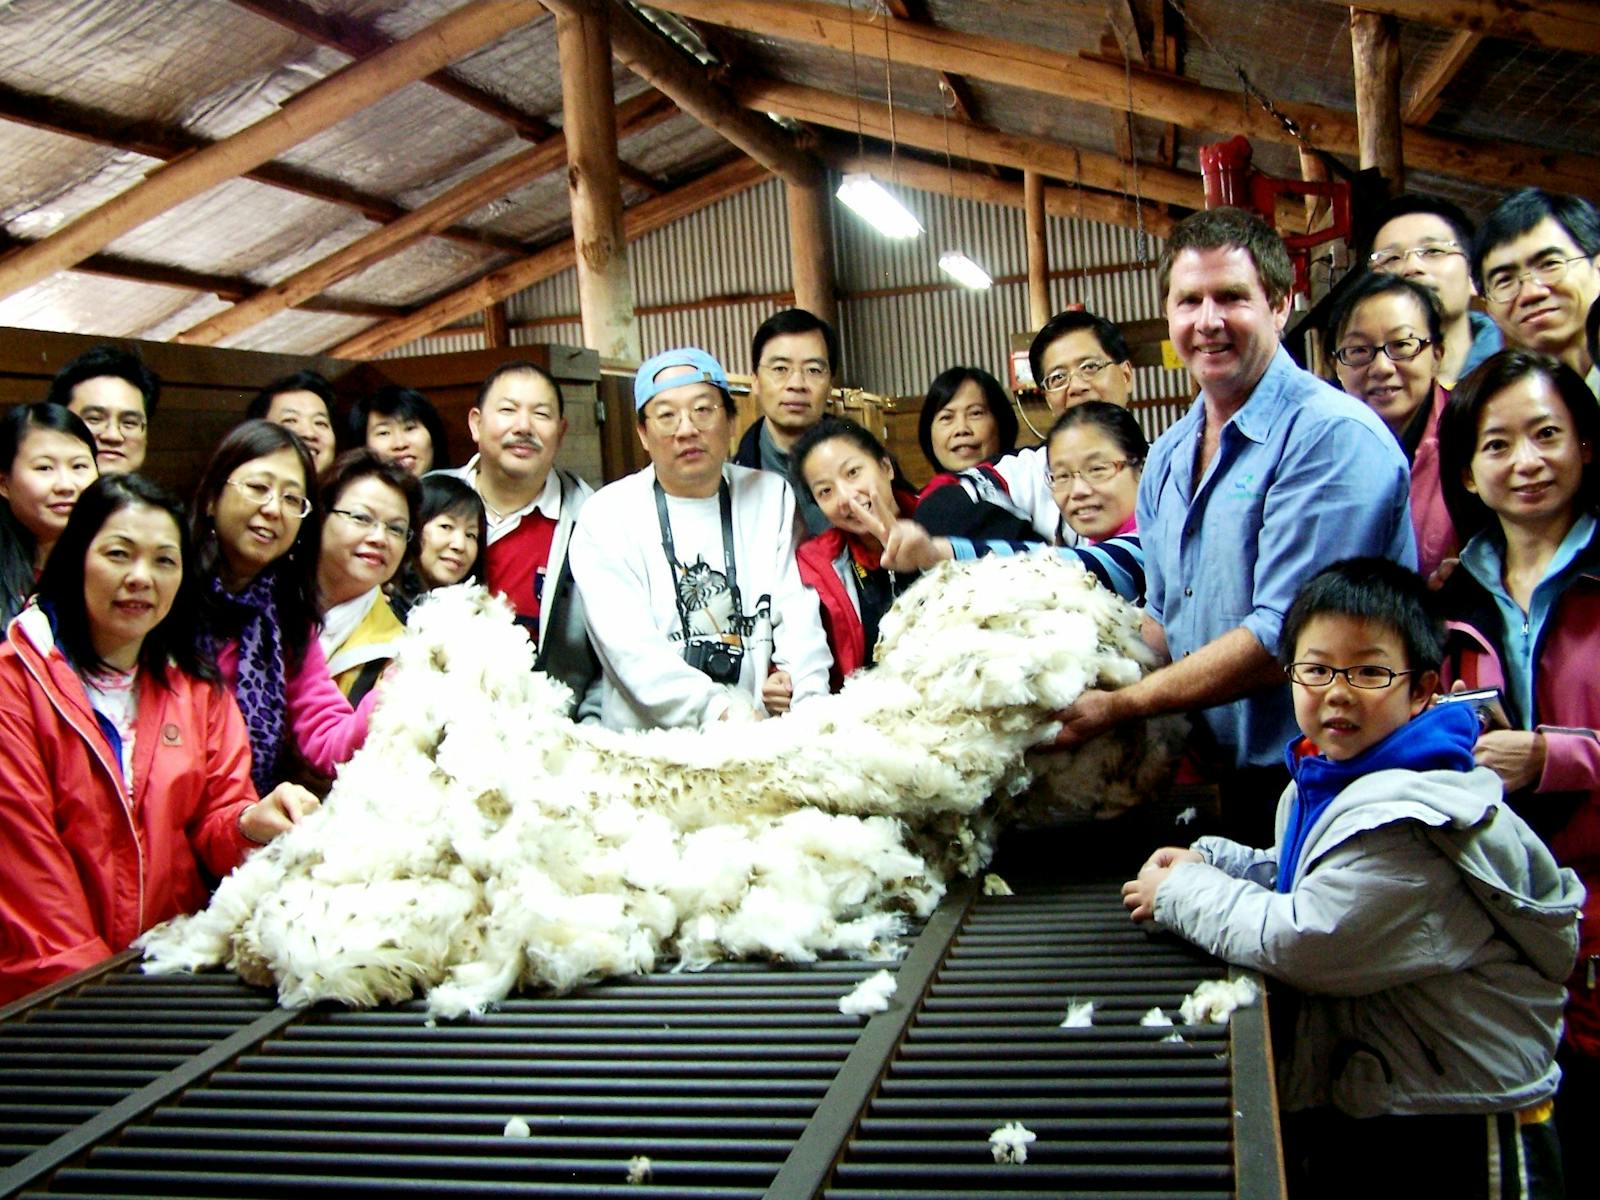 Touching the wool